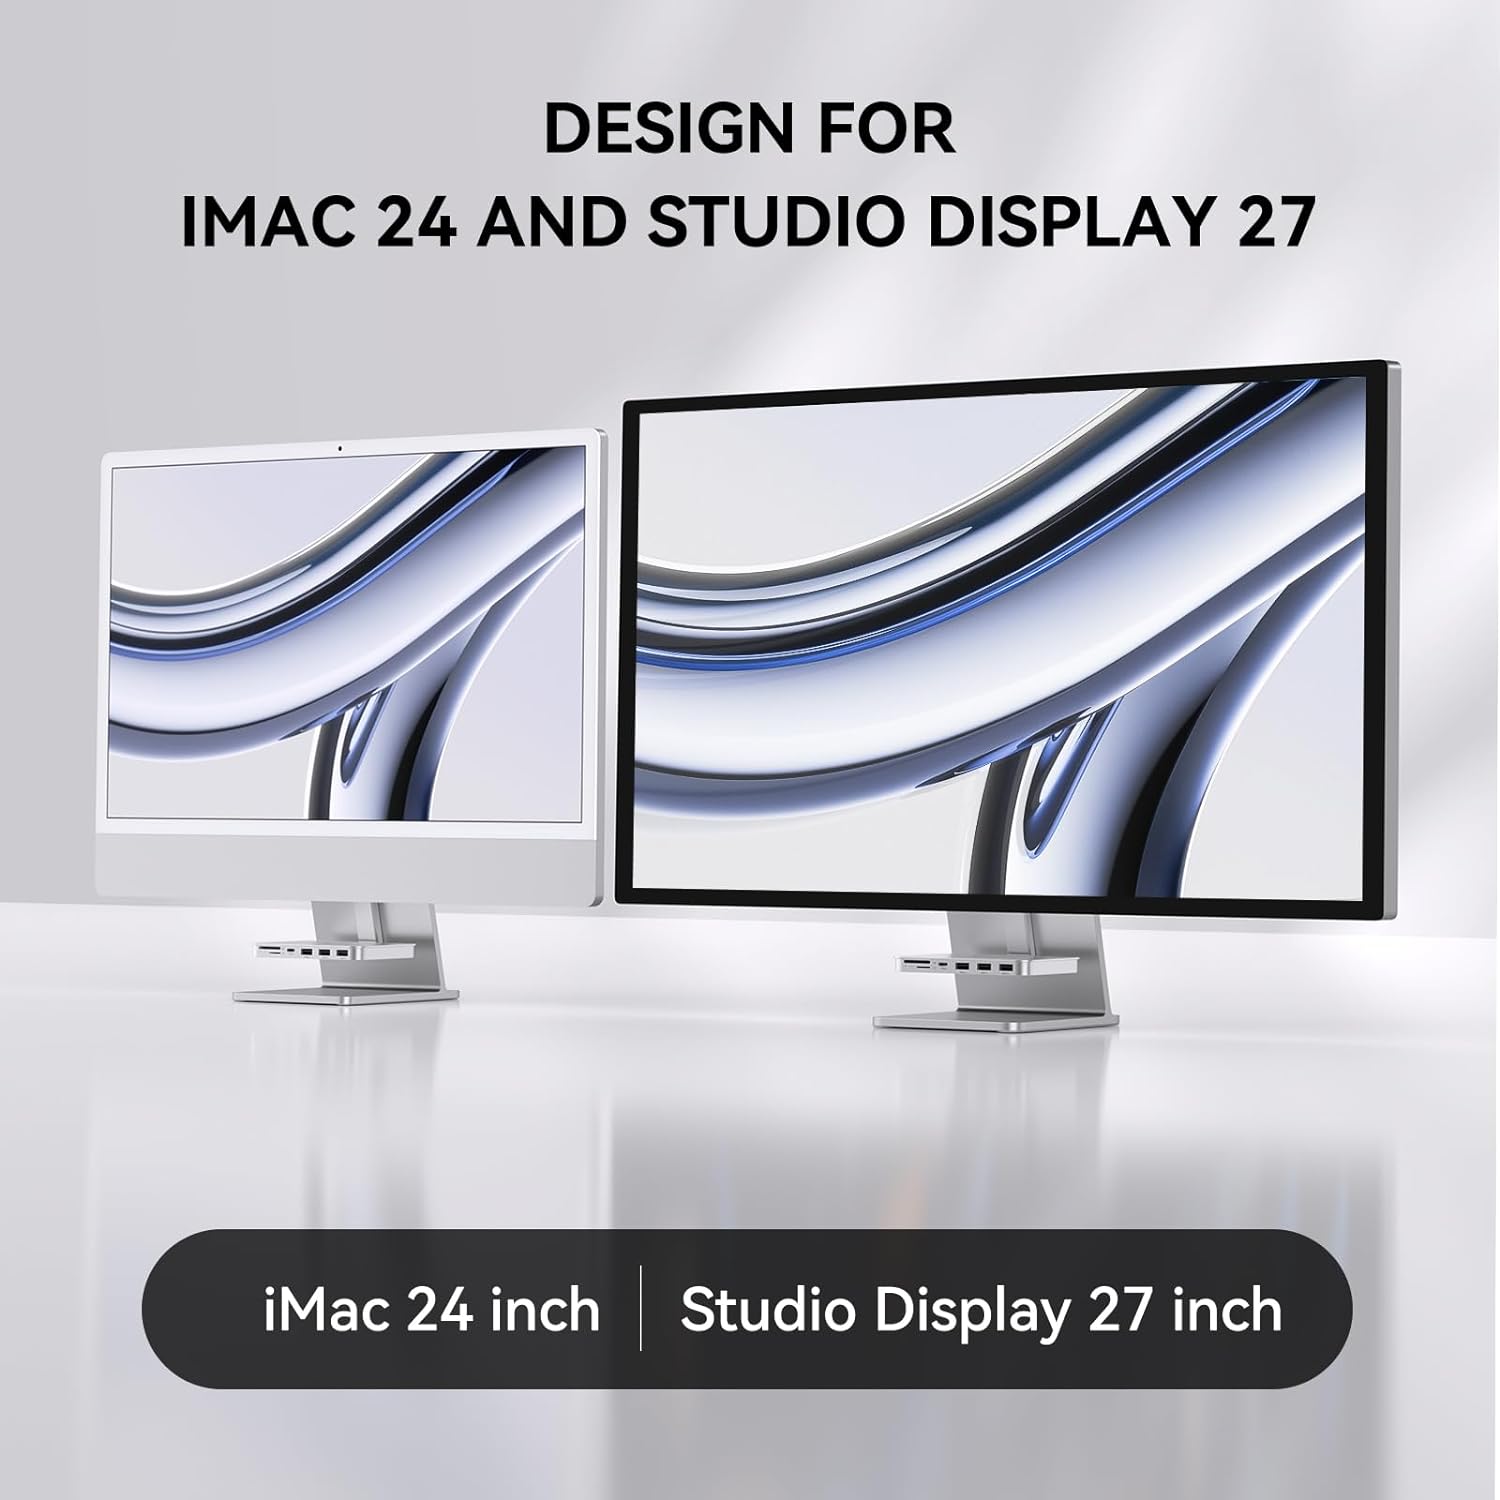 imac 24 and 27 inch